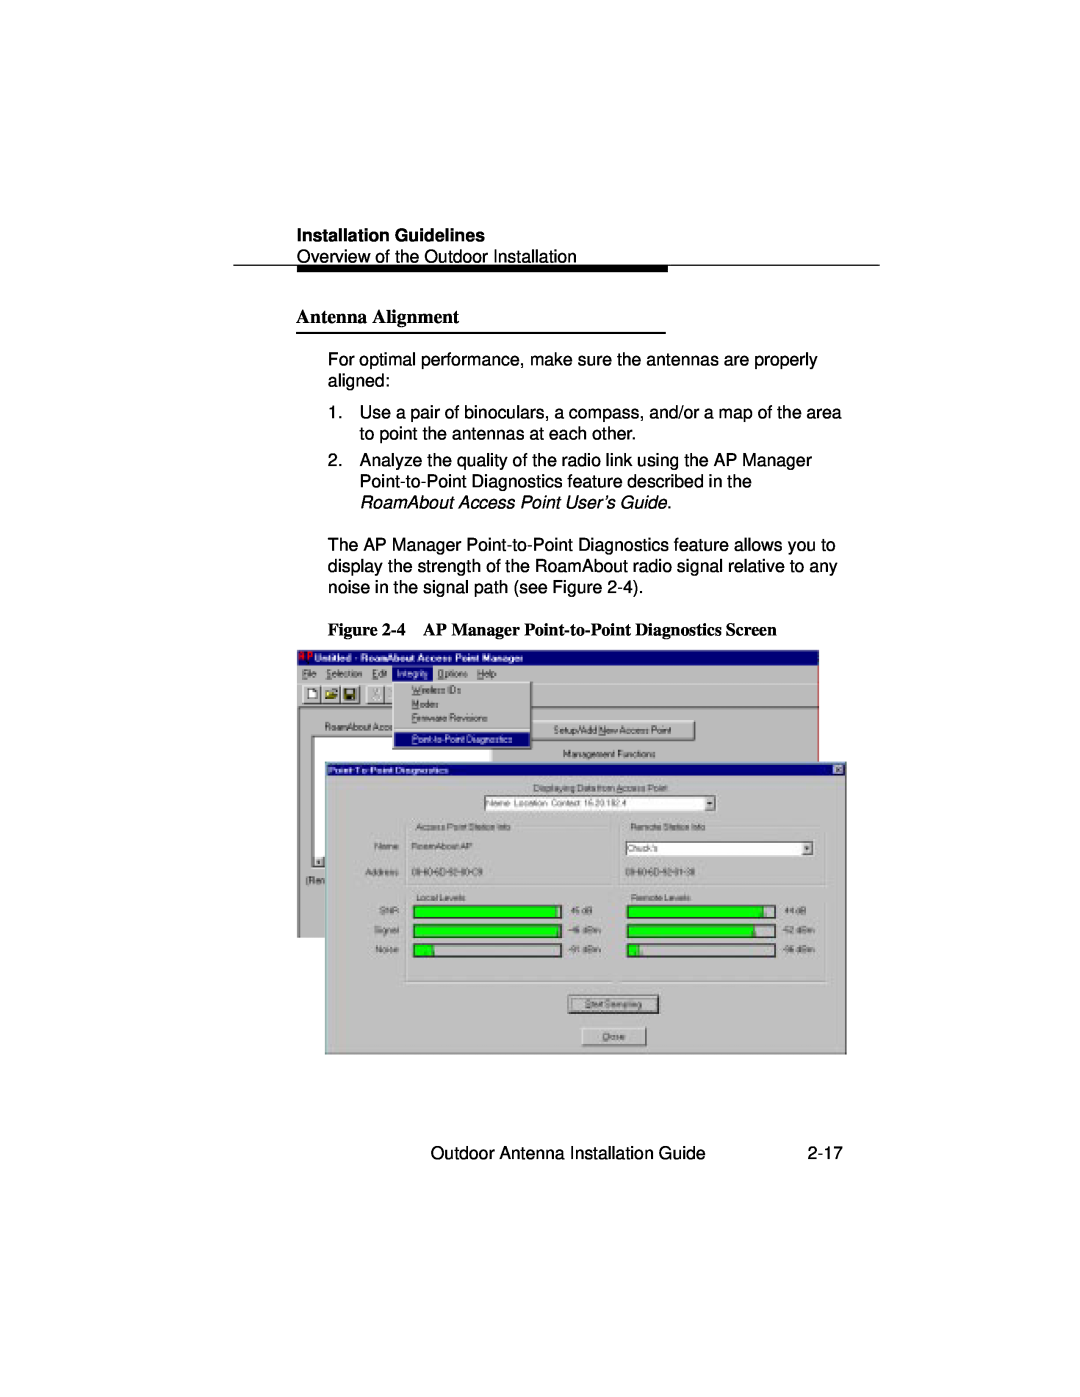 Cabletron Systems 9033073 manual Antenna Alignment, Installation Guidelines 